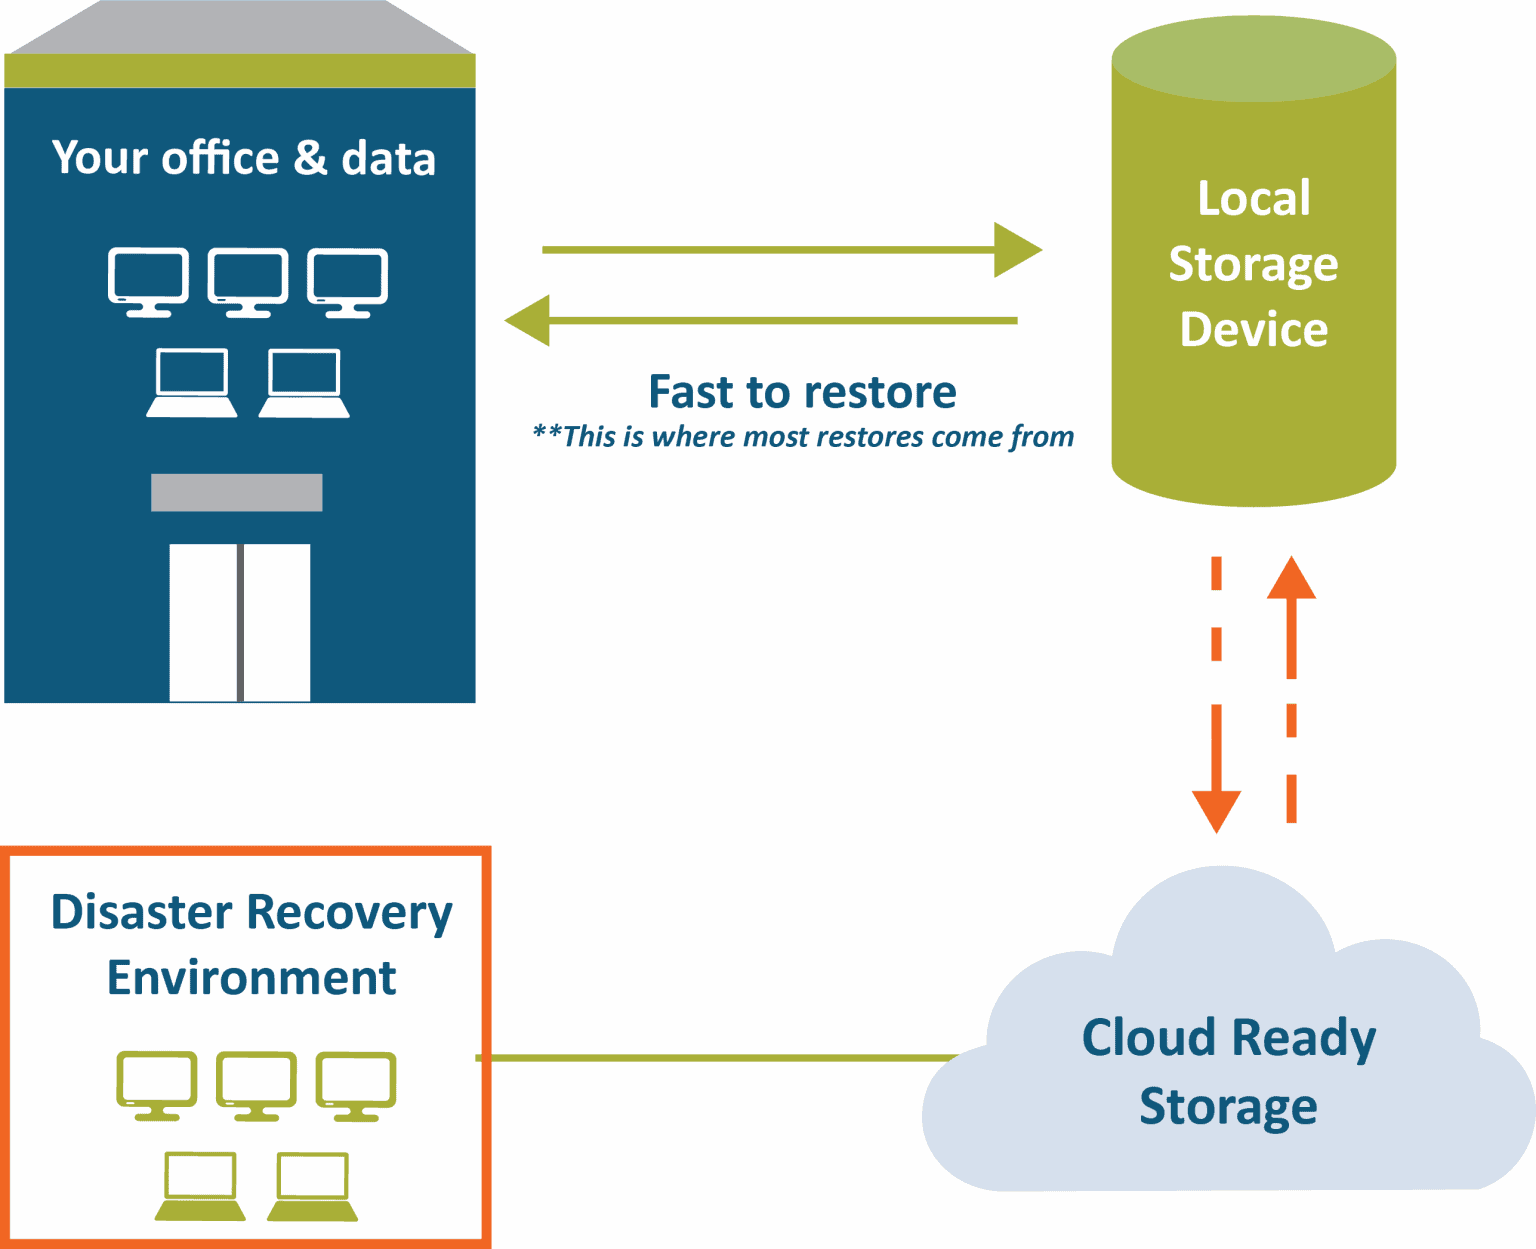 Backup системы. Draas (Disaster Recovery as a service). Recovery Backup data. Baas vs Draas. Mirror Backup scheme.